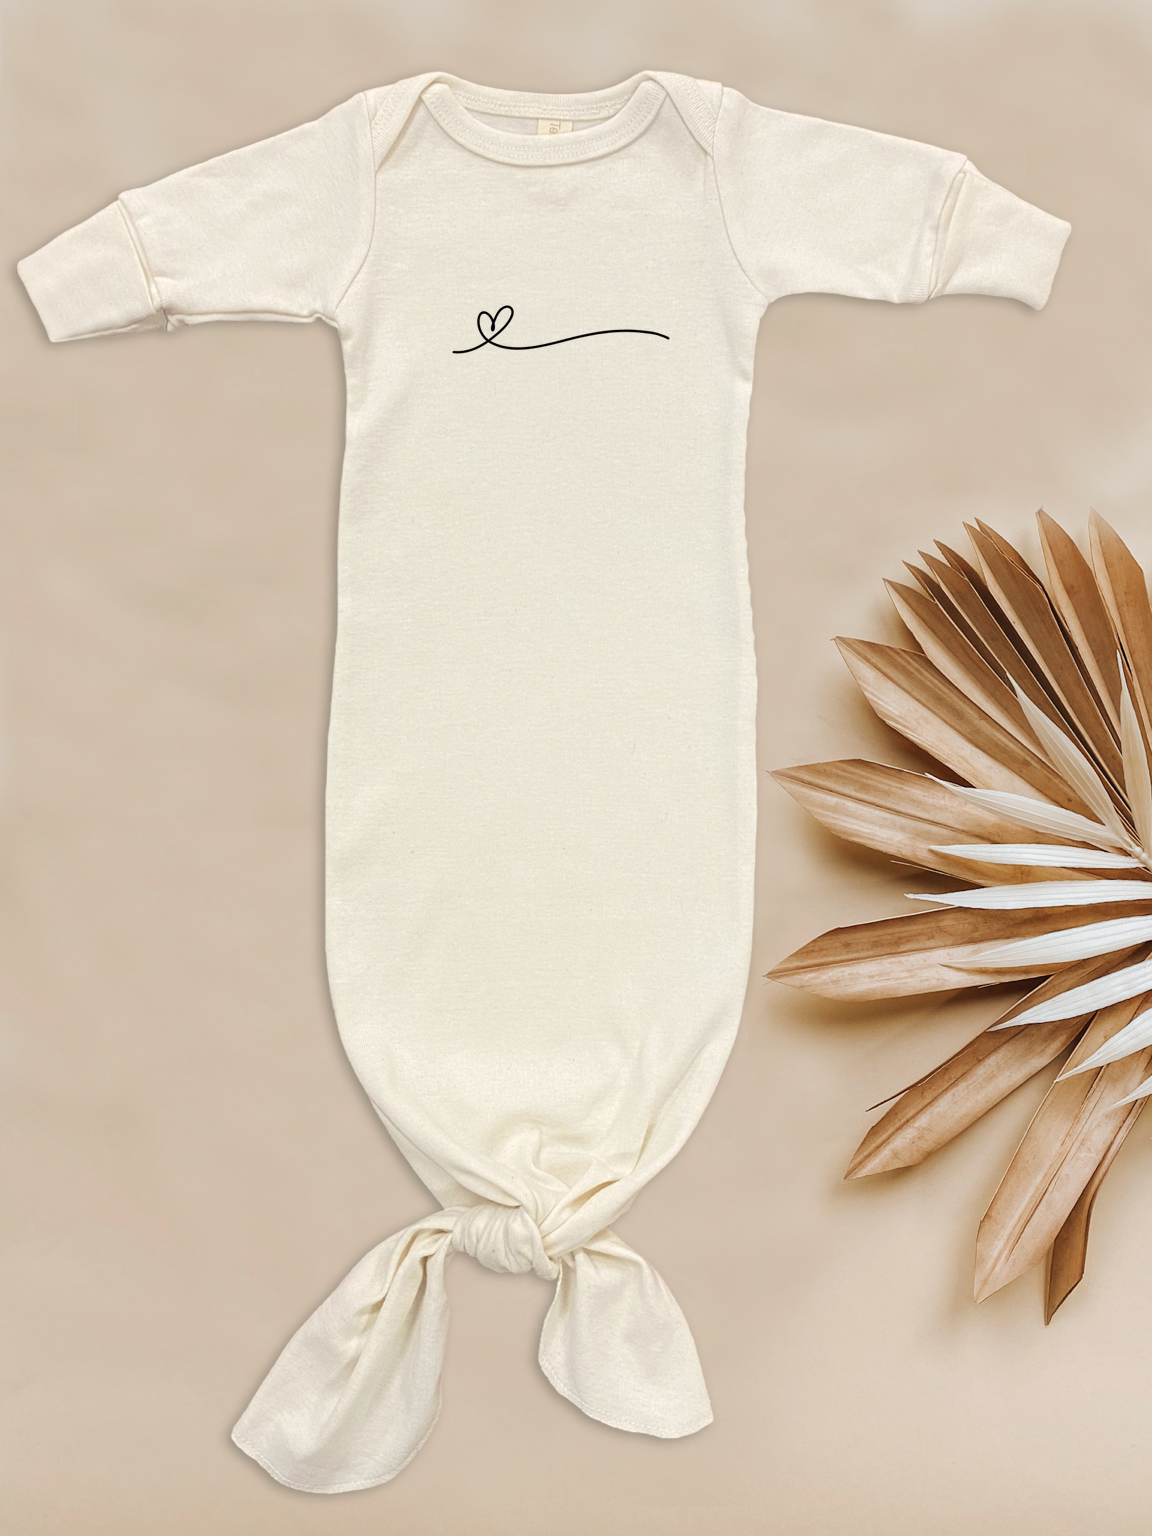 One Line Heart - Organic Cotton Infant Tie Gown